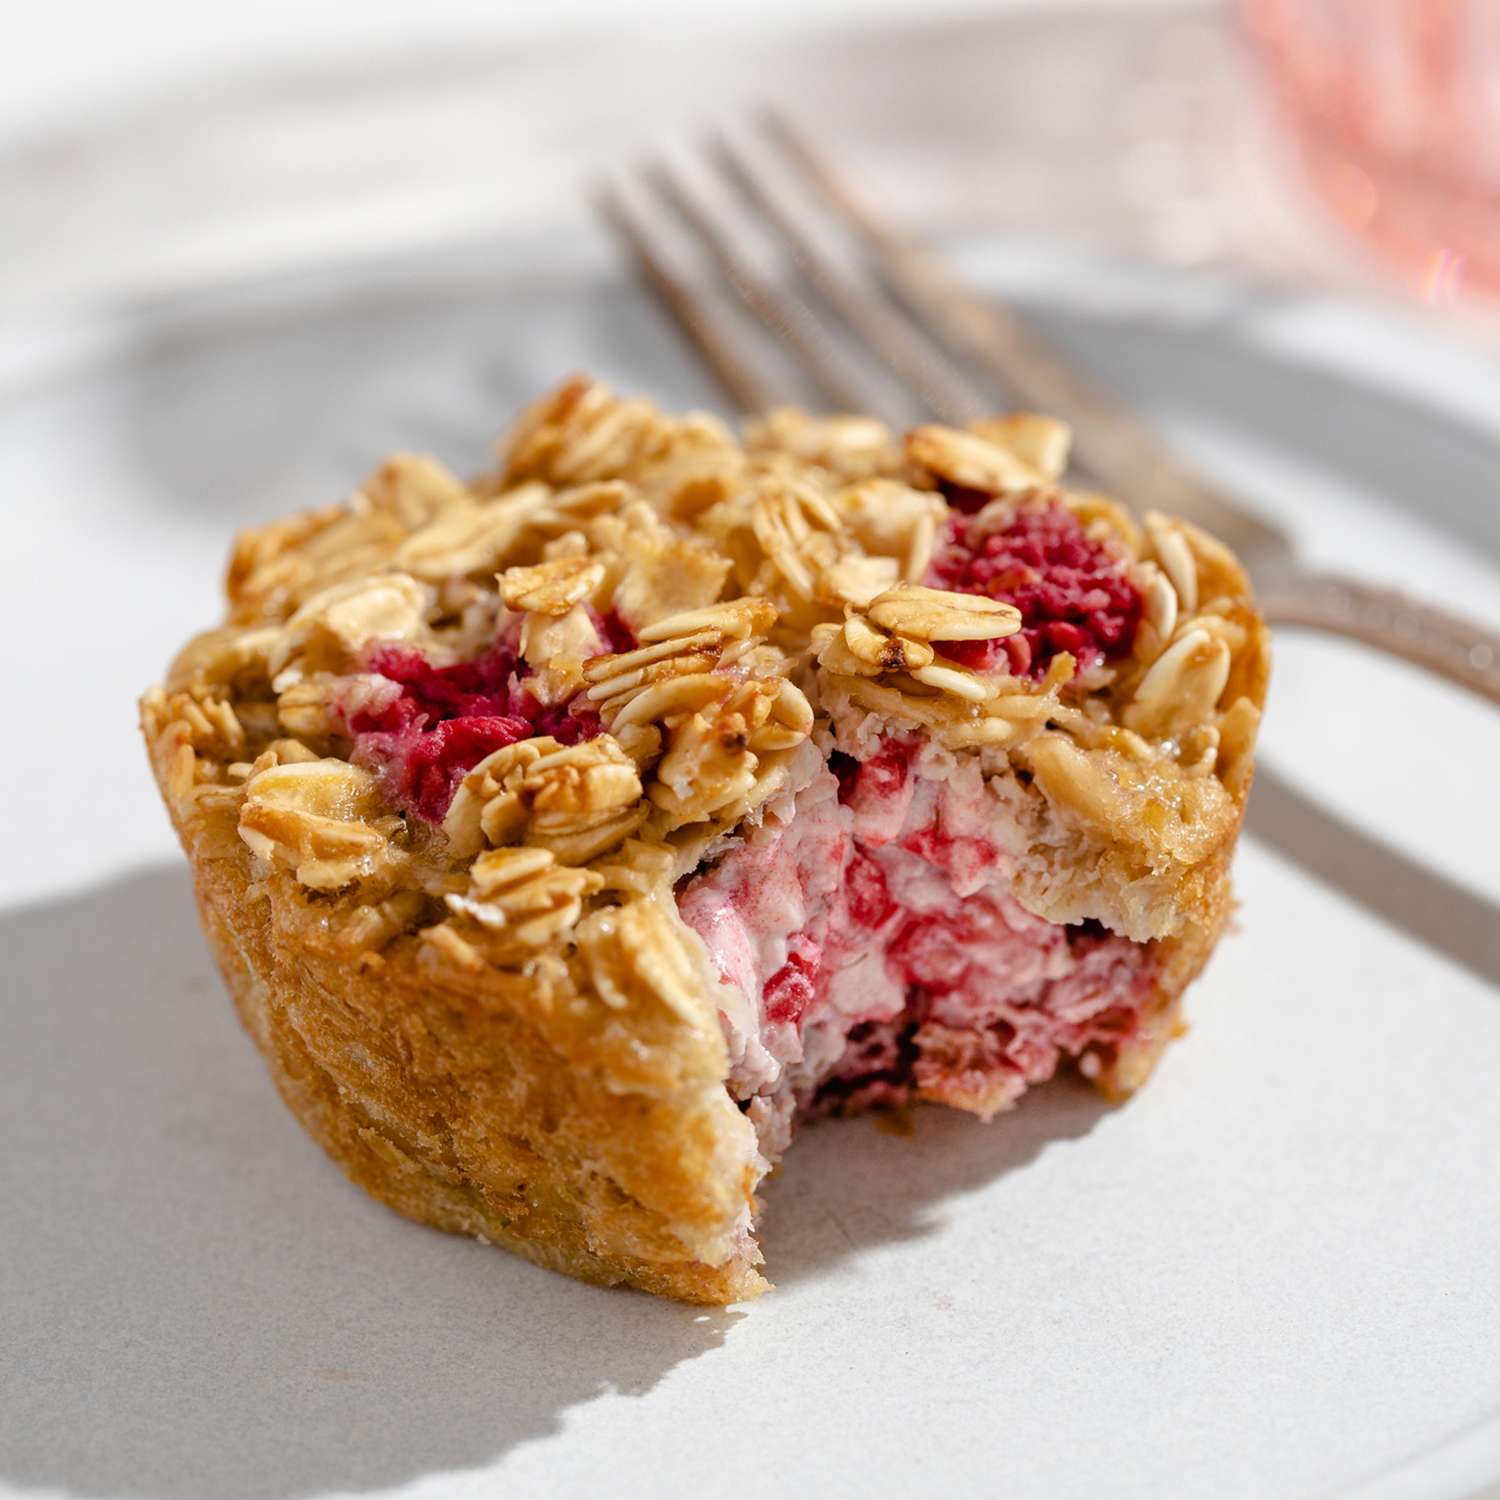 a recipe photo of the Lemon-Raspberry Cream Cheese Oatmeal Cakes served on a plate and cut open